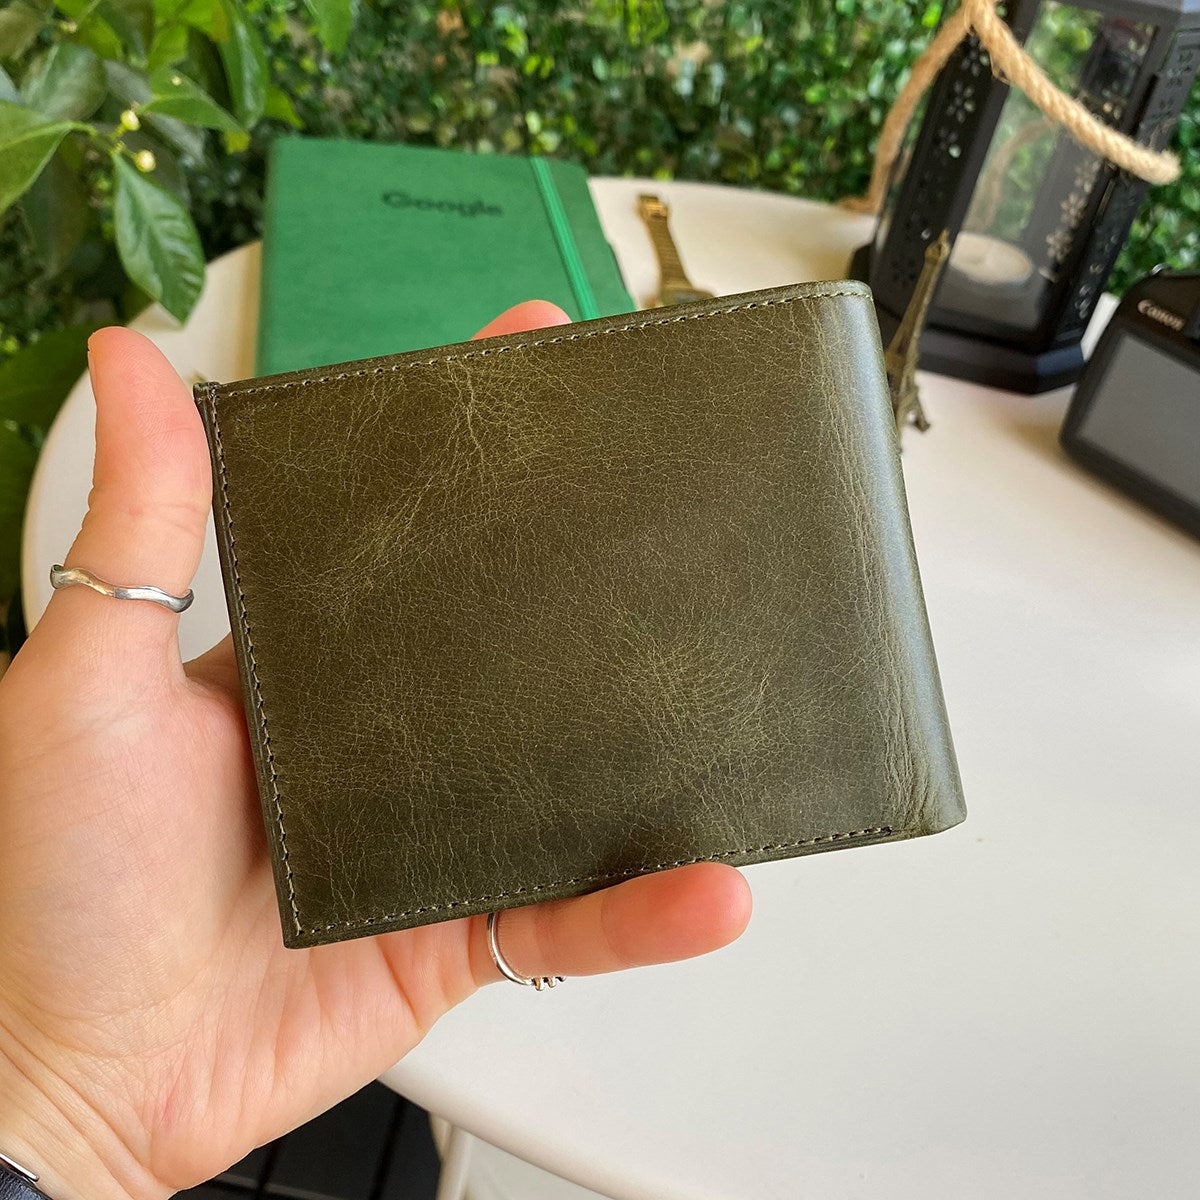 Atlanta - Genuine Leather Trifold Wallet with Coin Pouch Compartment